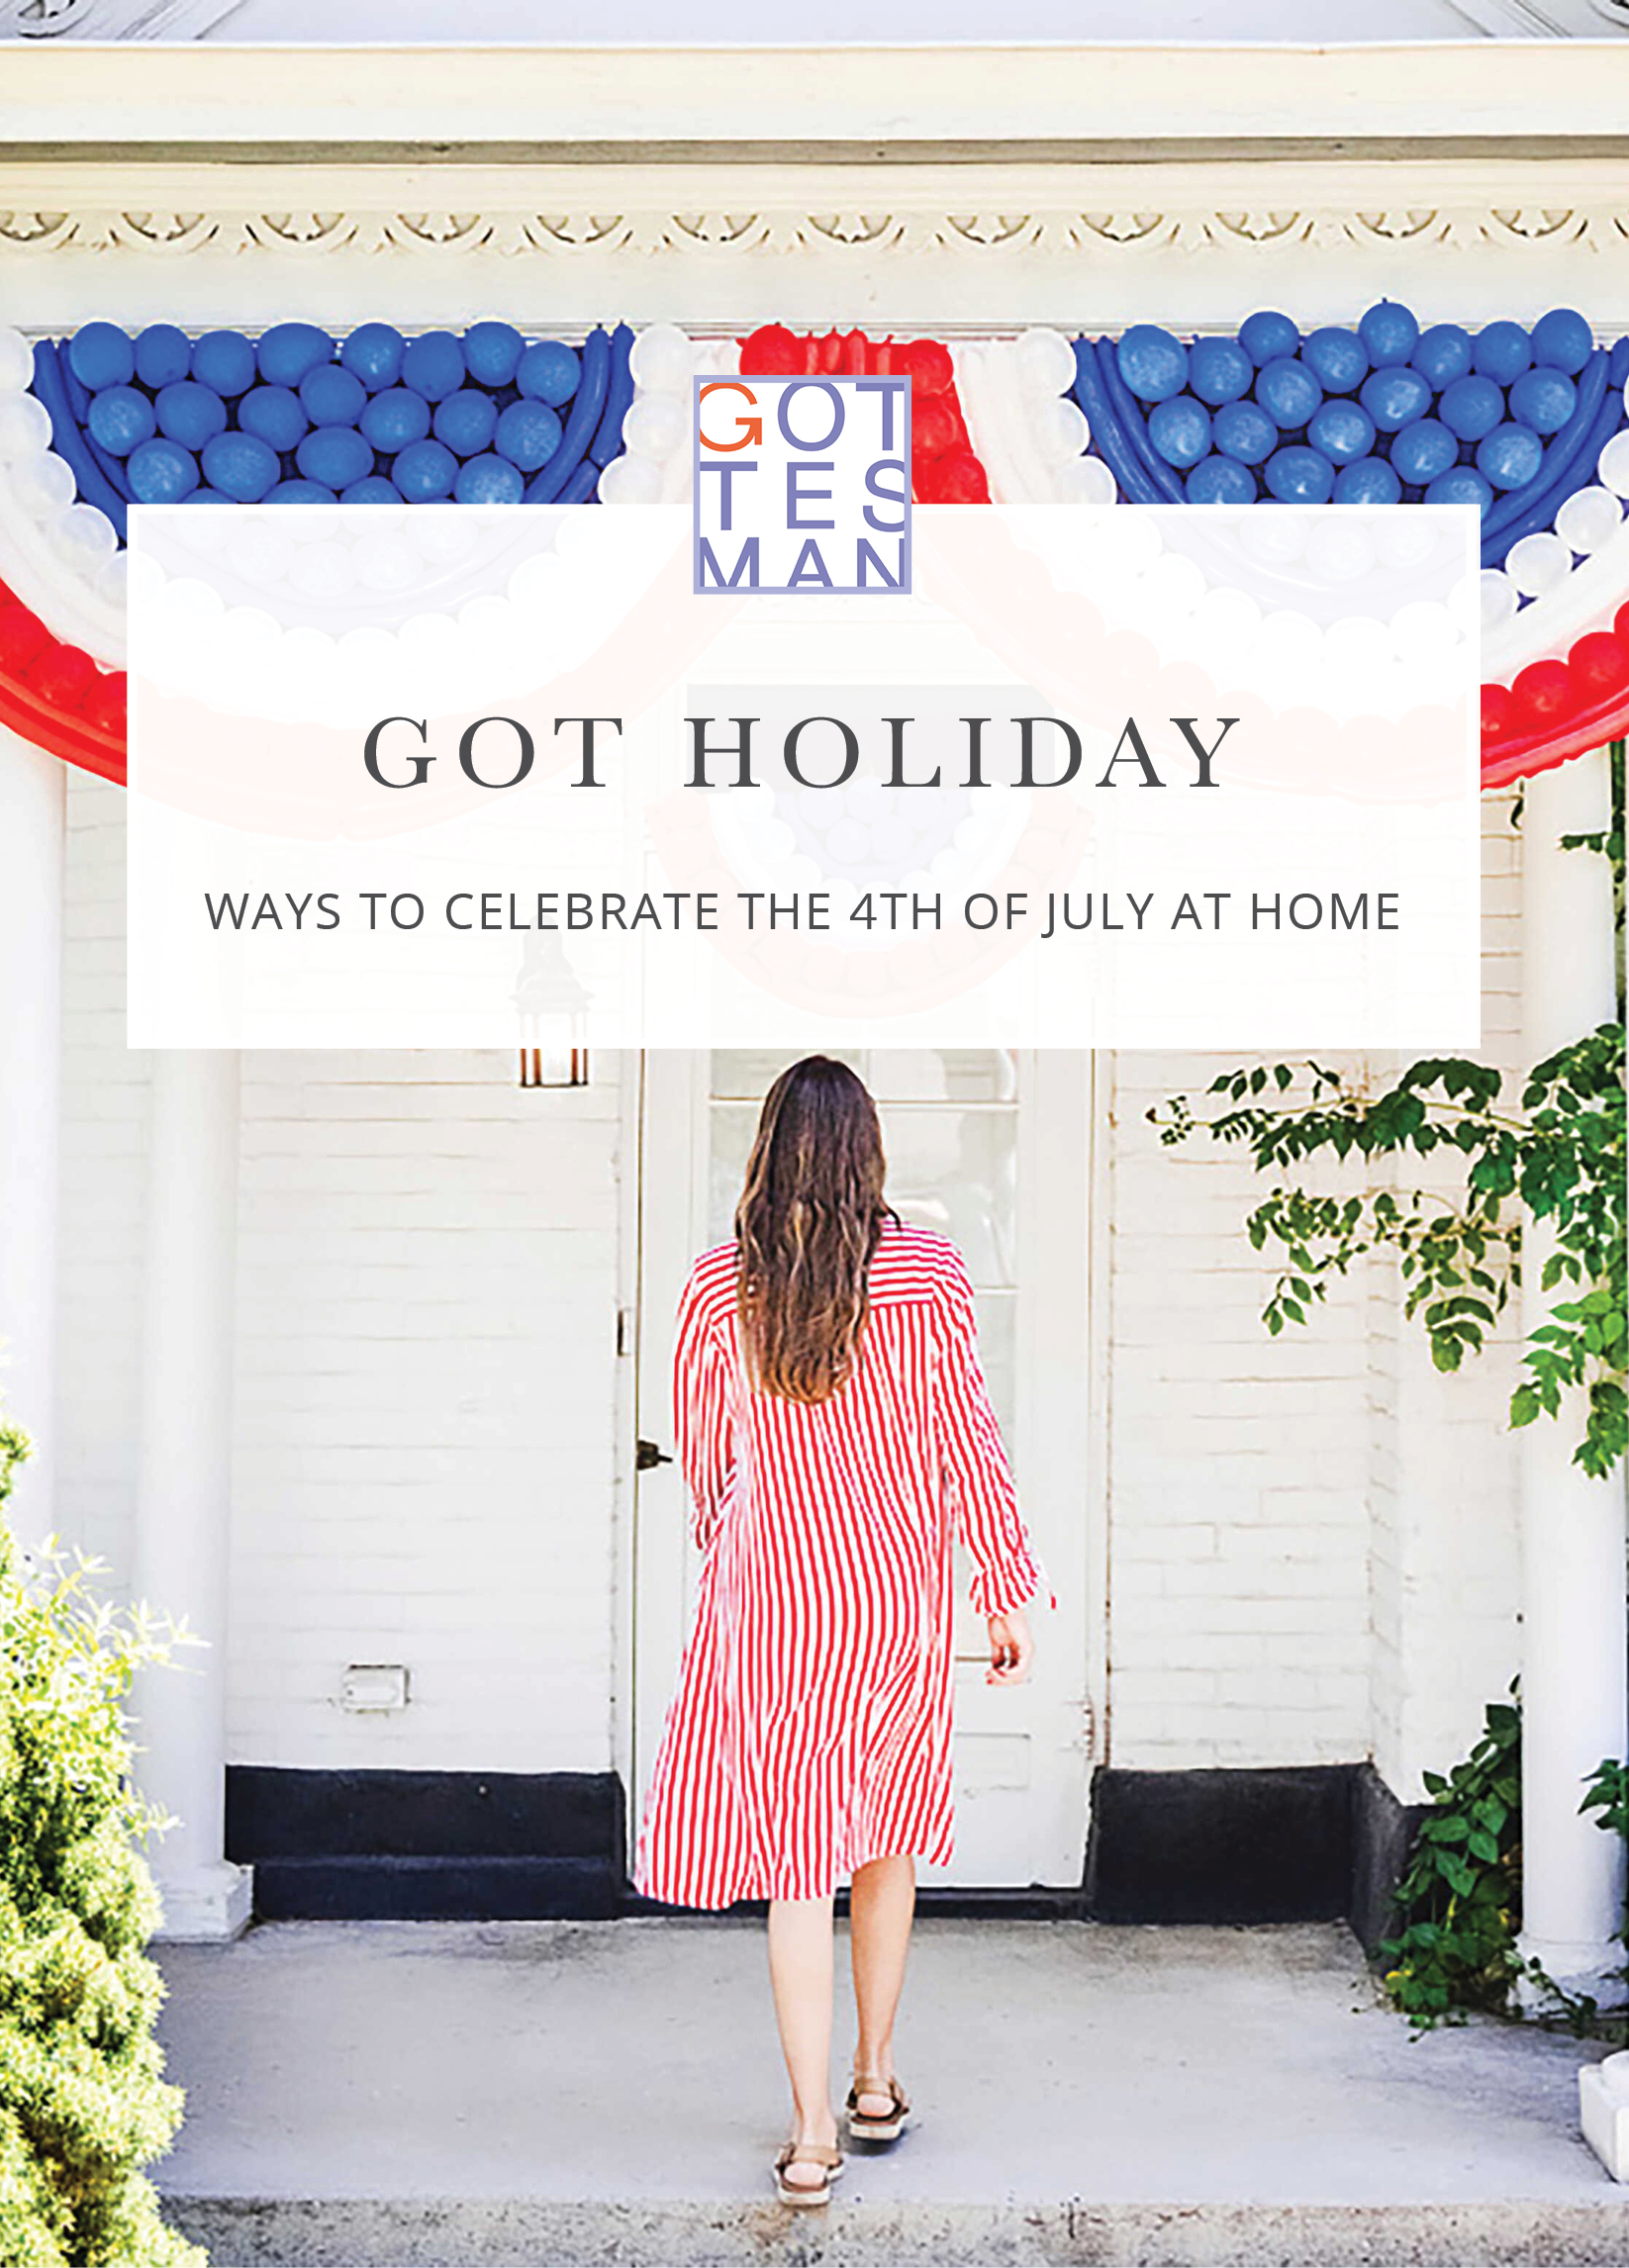 Woman in a red and white dress with text overlay, "Got Holiday: Ways to Celebrate the 4th of July"